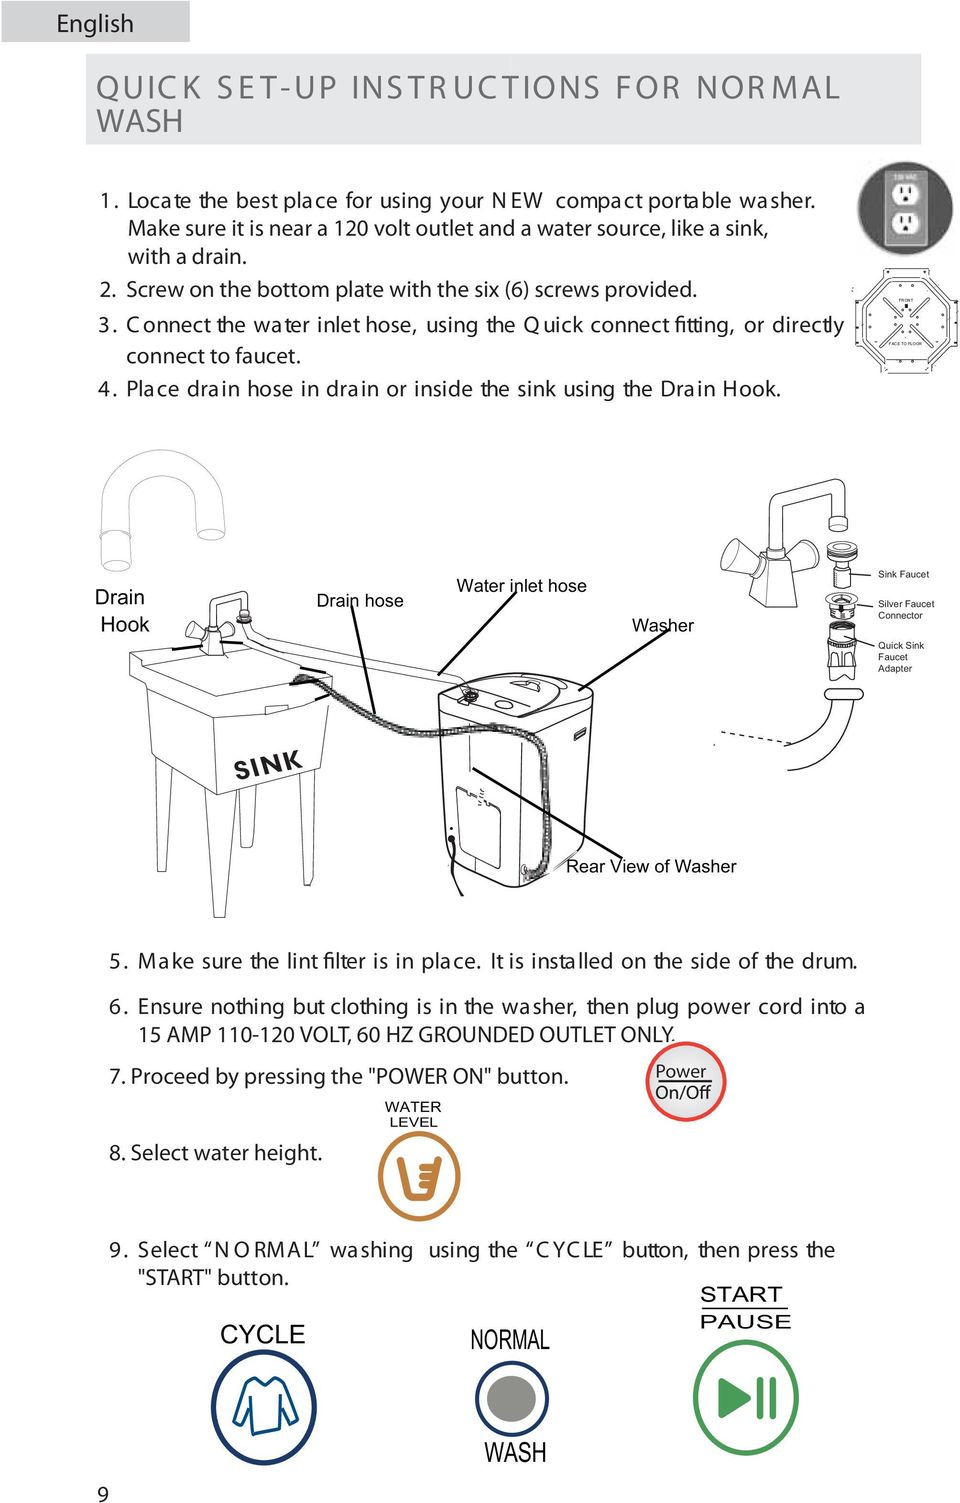 C onnect the water inlet hose, using the Q uick connect fitting, or directly connect to faucet. 4. Place drain hose in drain or inside the sink using the Drain Hook.